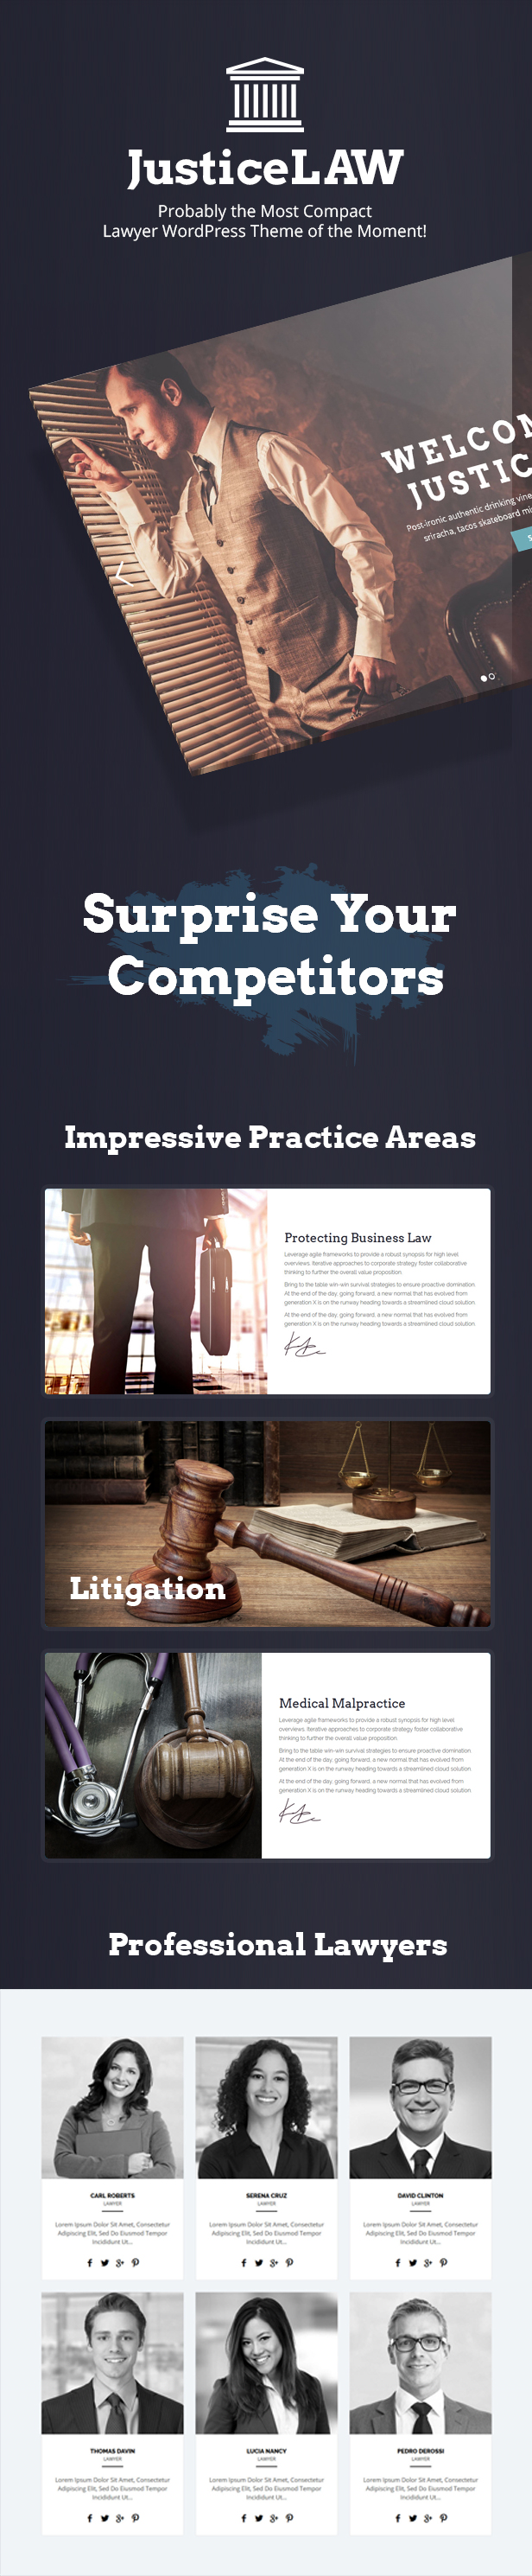 JusticeLAW - A Theme for Lawyers and Consultants - 3